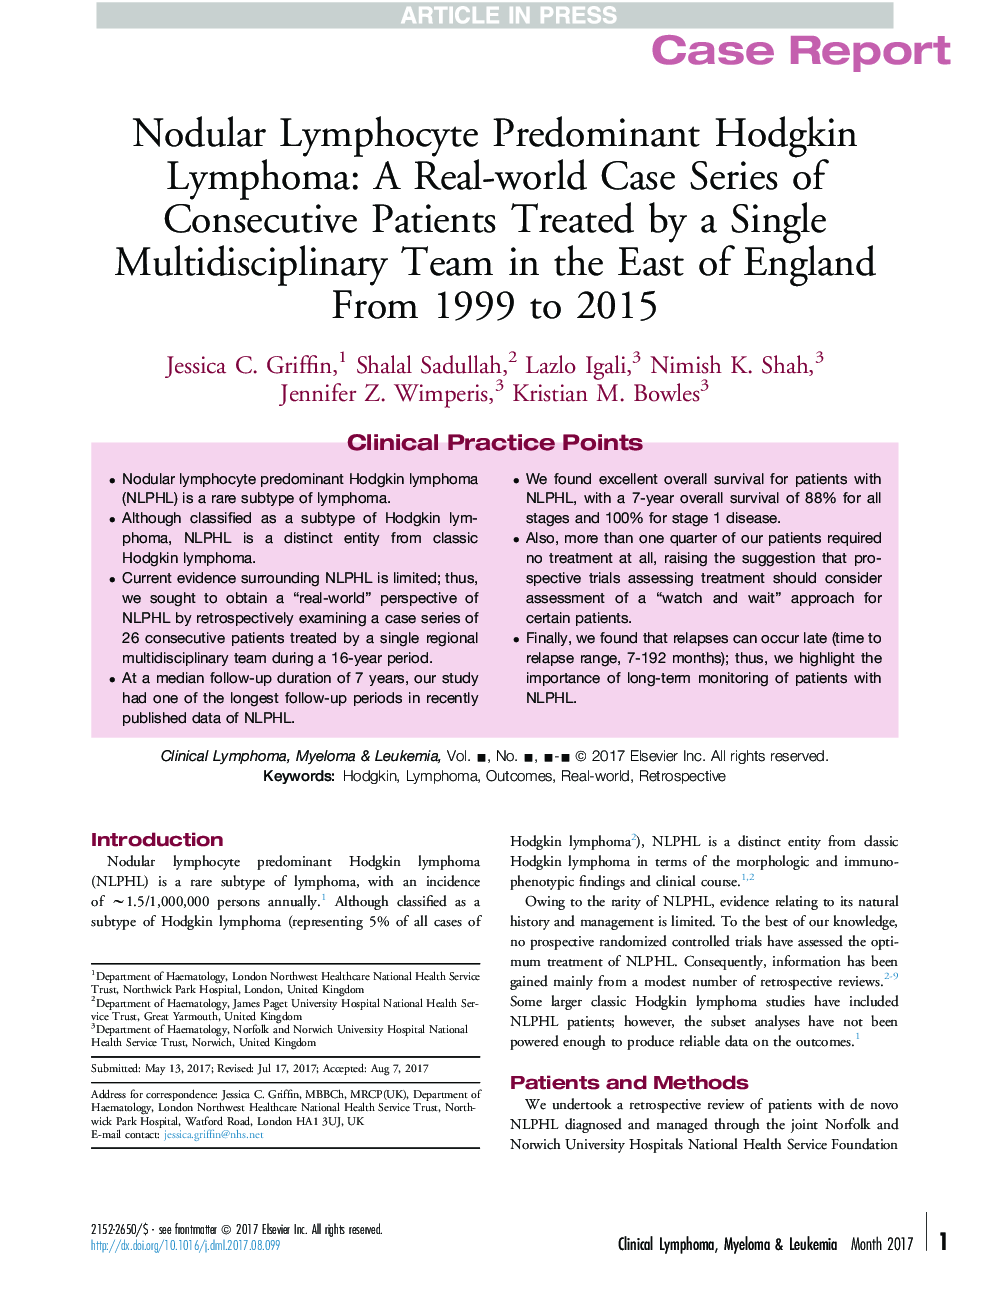 Nodular Lymphocyte Predominant Hodgkin Lymphoma: A Real-world Case Series of Consecutive Patients Treated by a Single Multidisciplinary Team in the East of England From 1999 to 2015